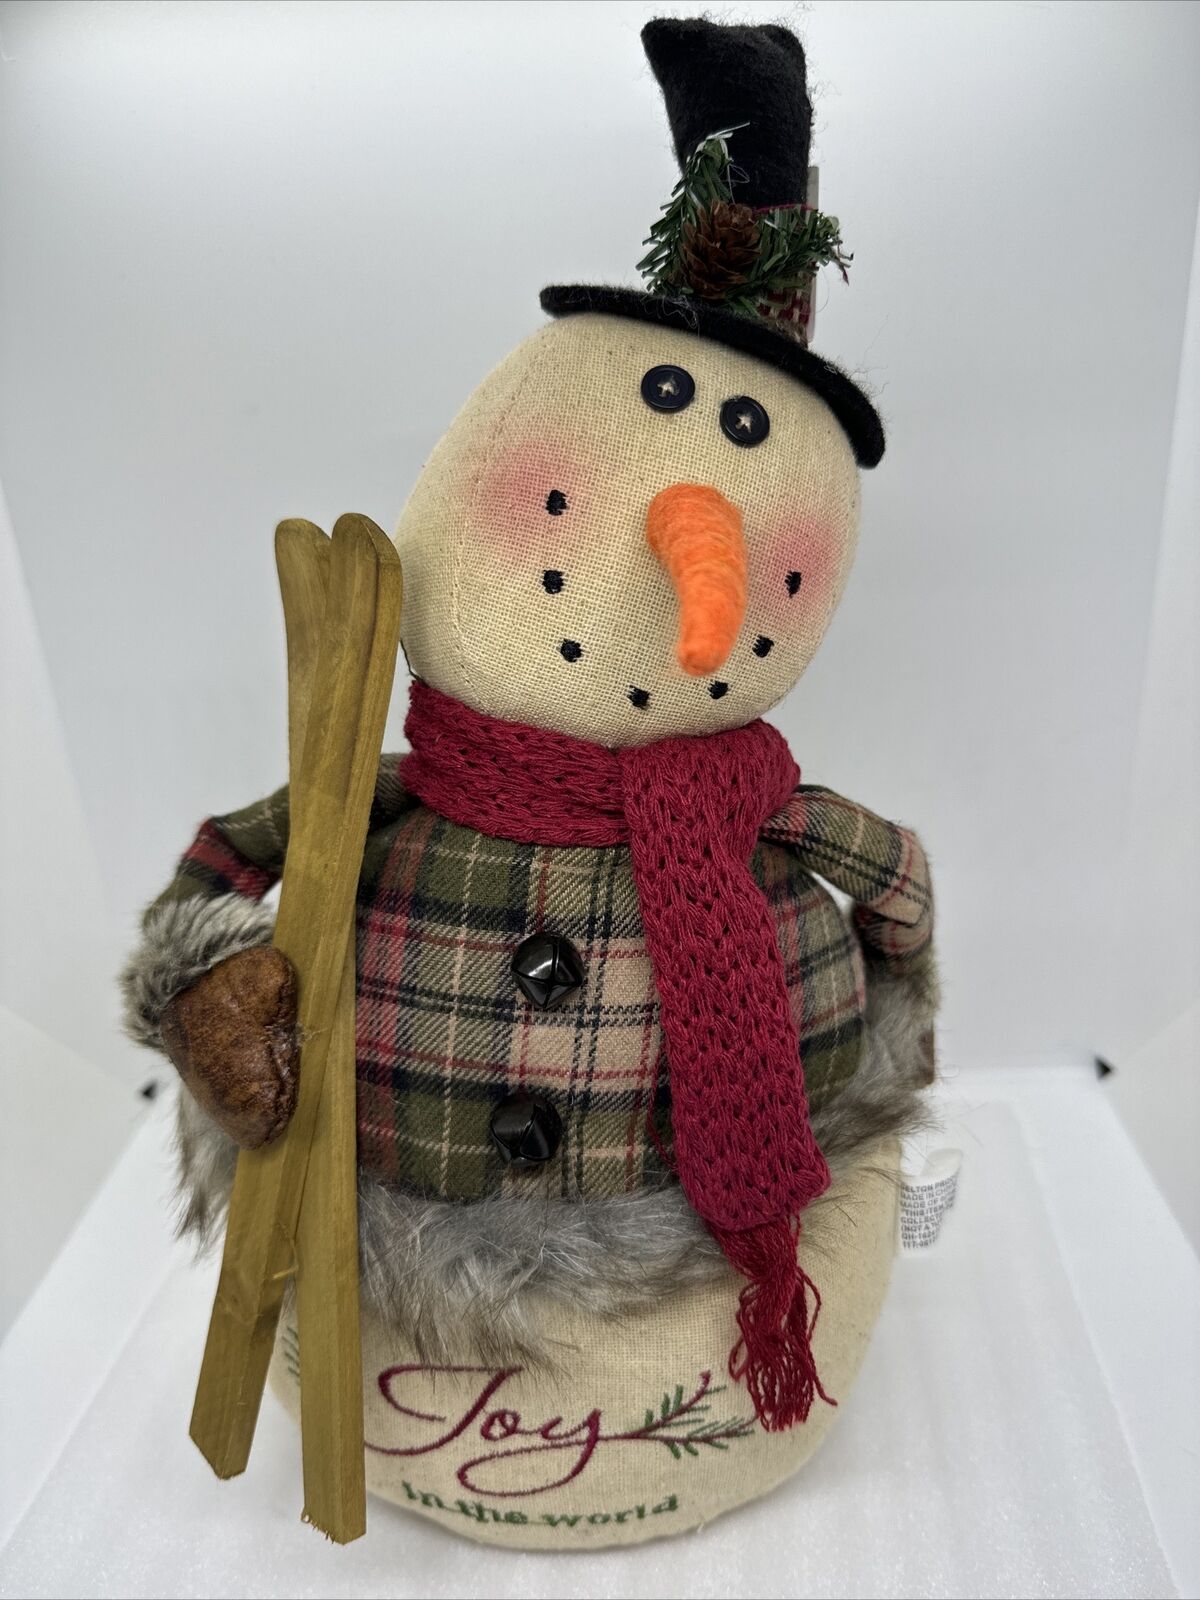 Delton Products 16” Snowman W/Skis Plush Bell Buttons “Joy In The World” Canvas